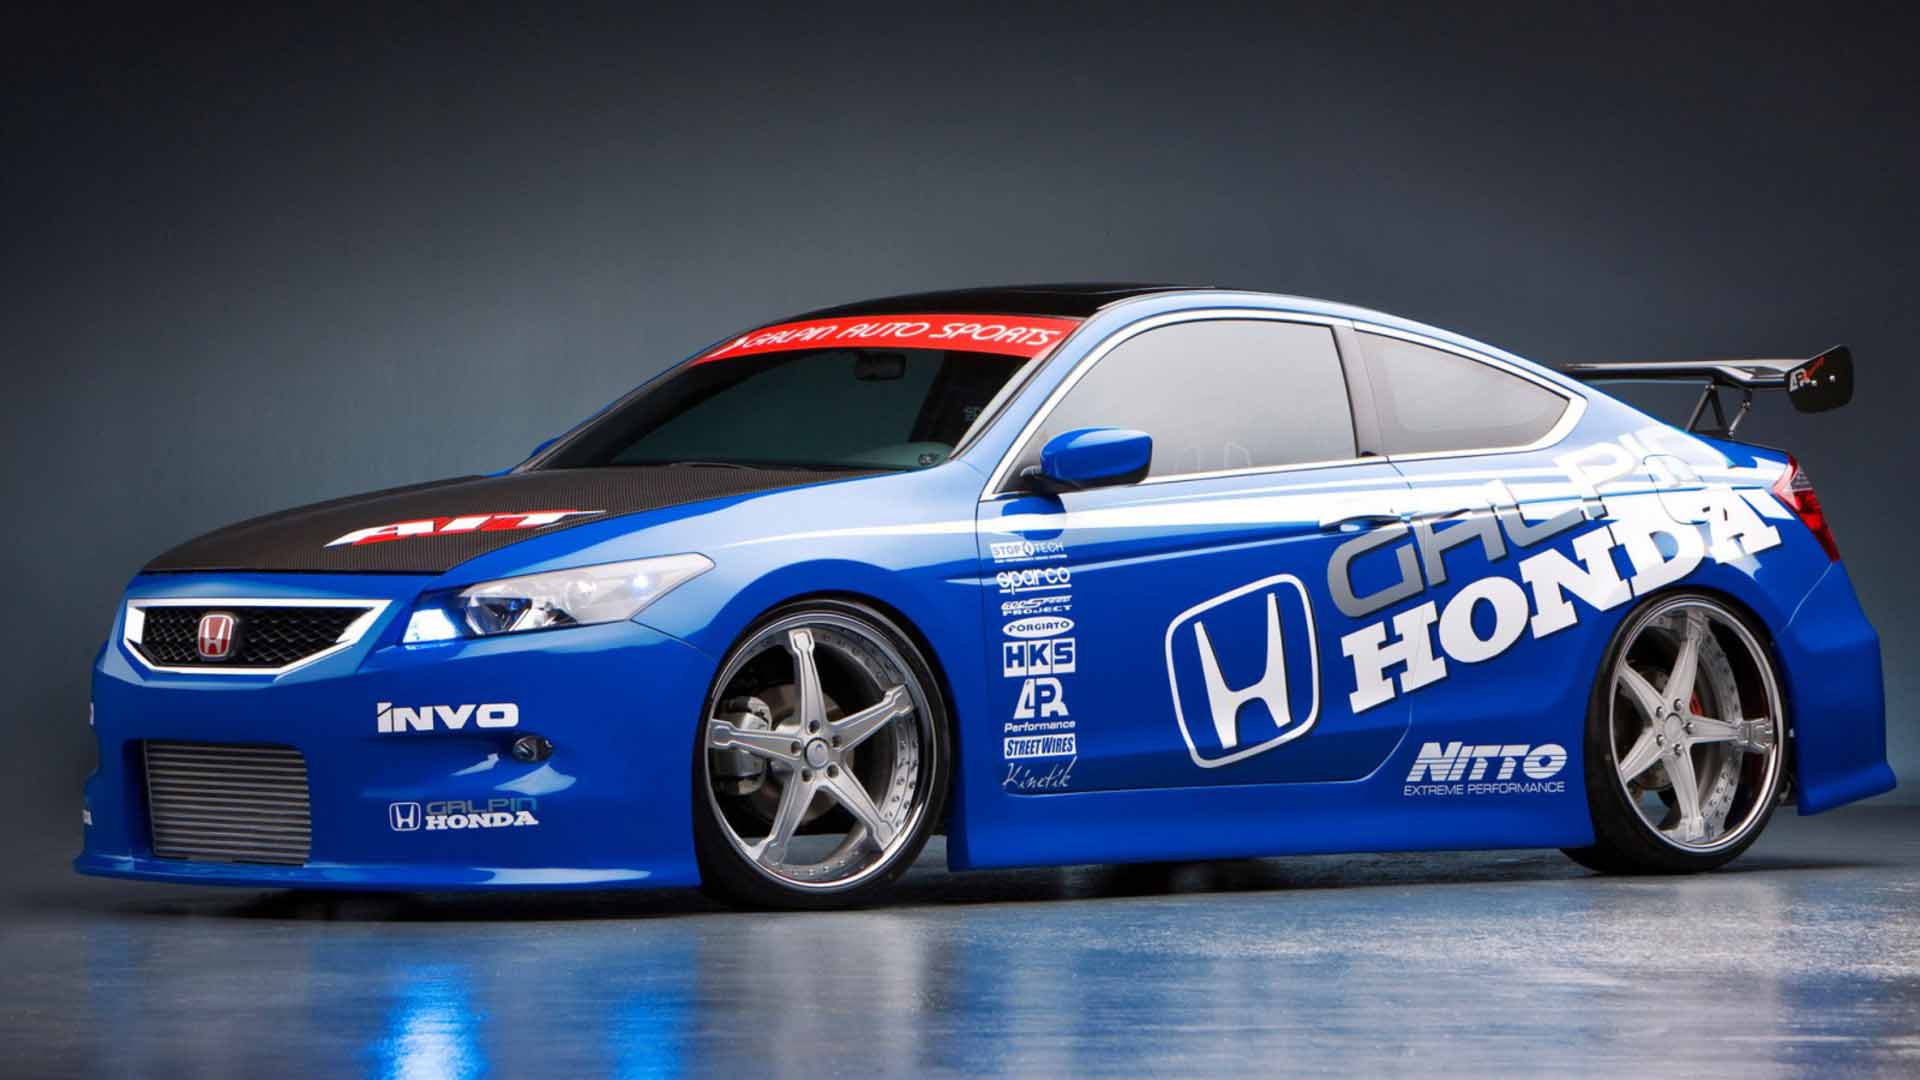 HONDA ACCORD COUPE CUSTOM PICTURE. NEW CARS WALLPAPERS